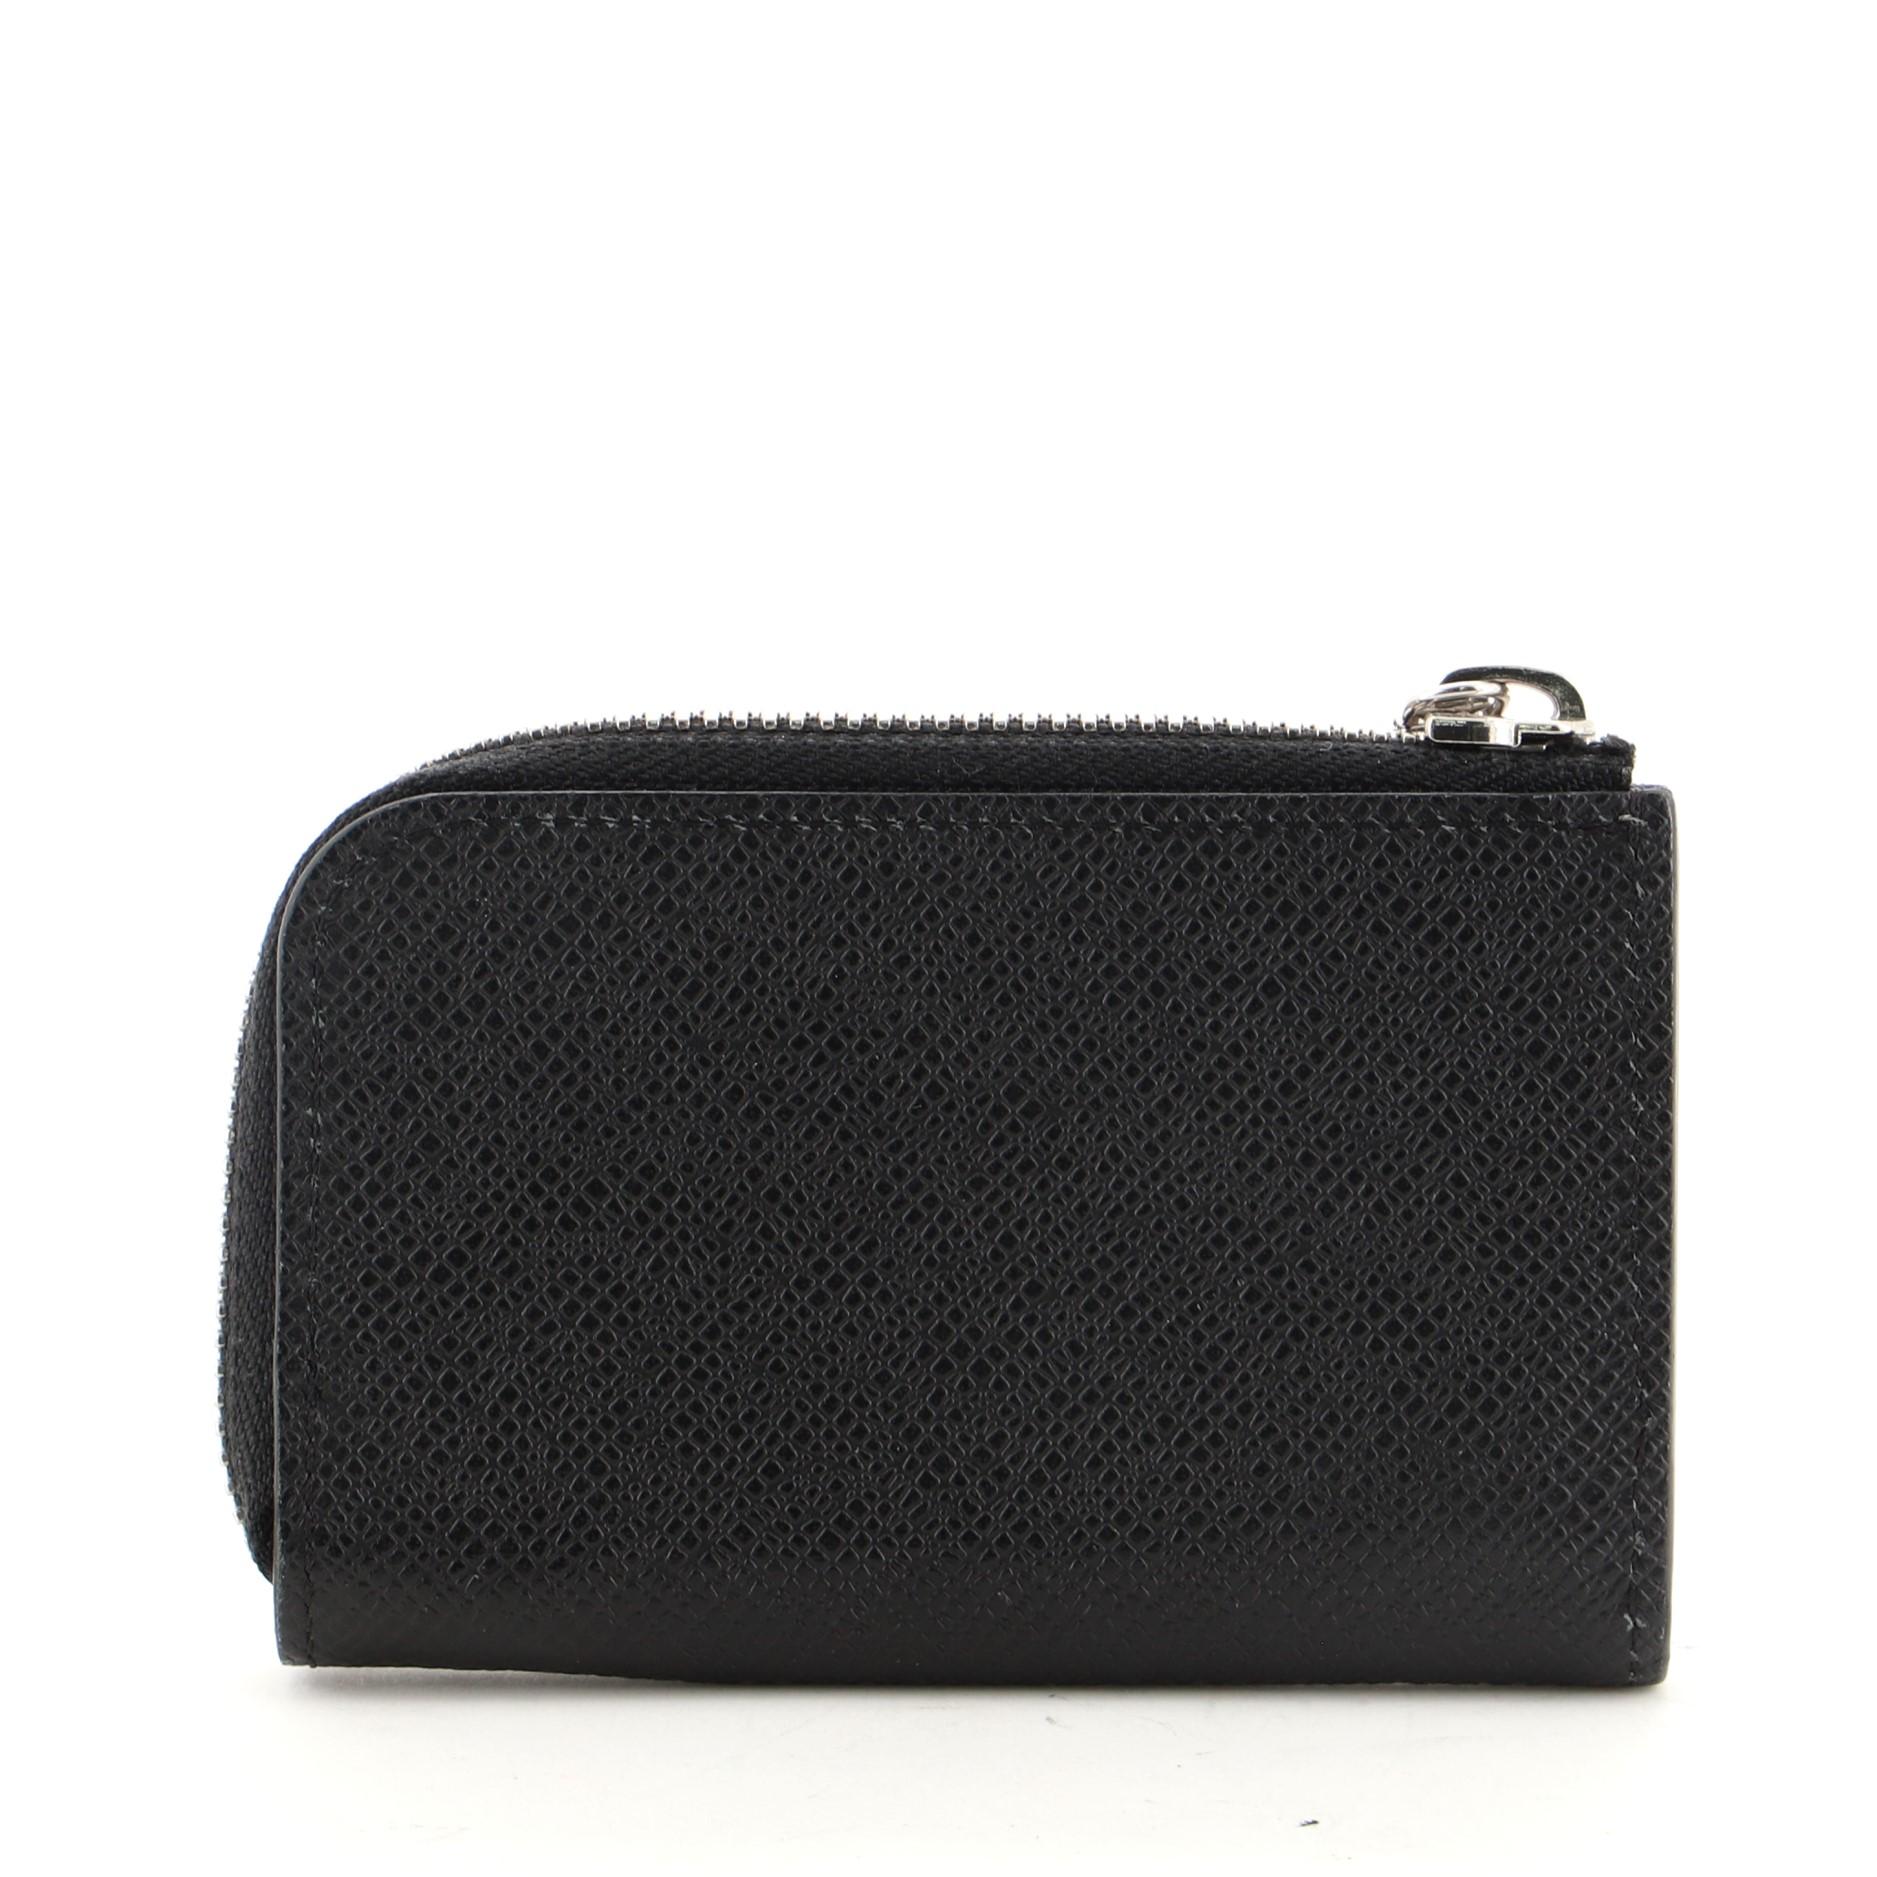 Louis Vuitton Zip Coin Purse Taiga Leather
Black Taiga Leather

Condition Details: Light scuffs and wear in interior, scratches on hardware.

45832MSC

Height 